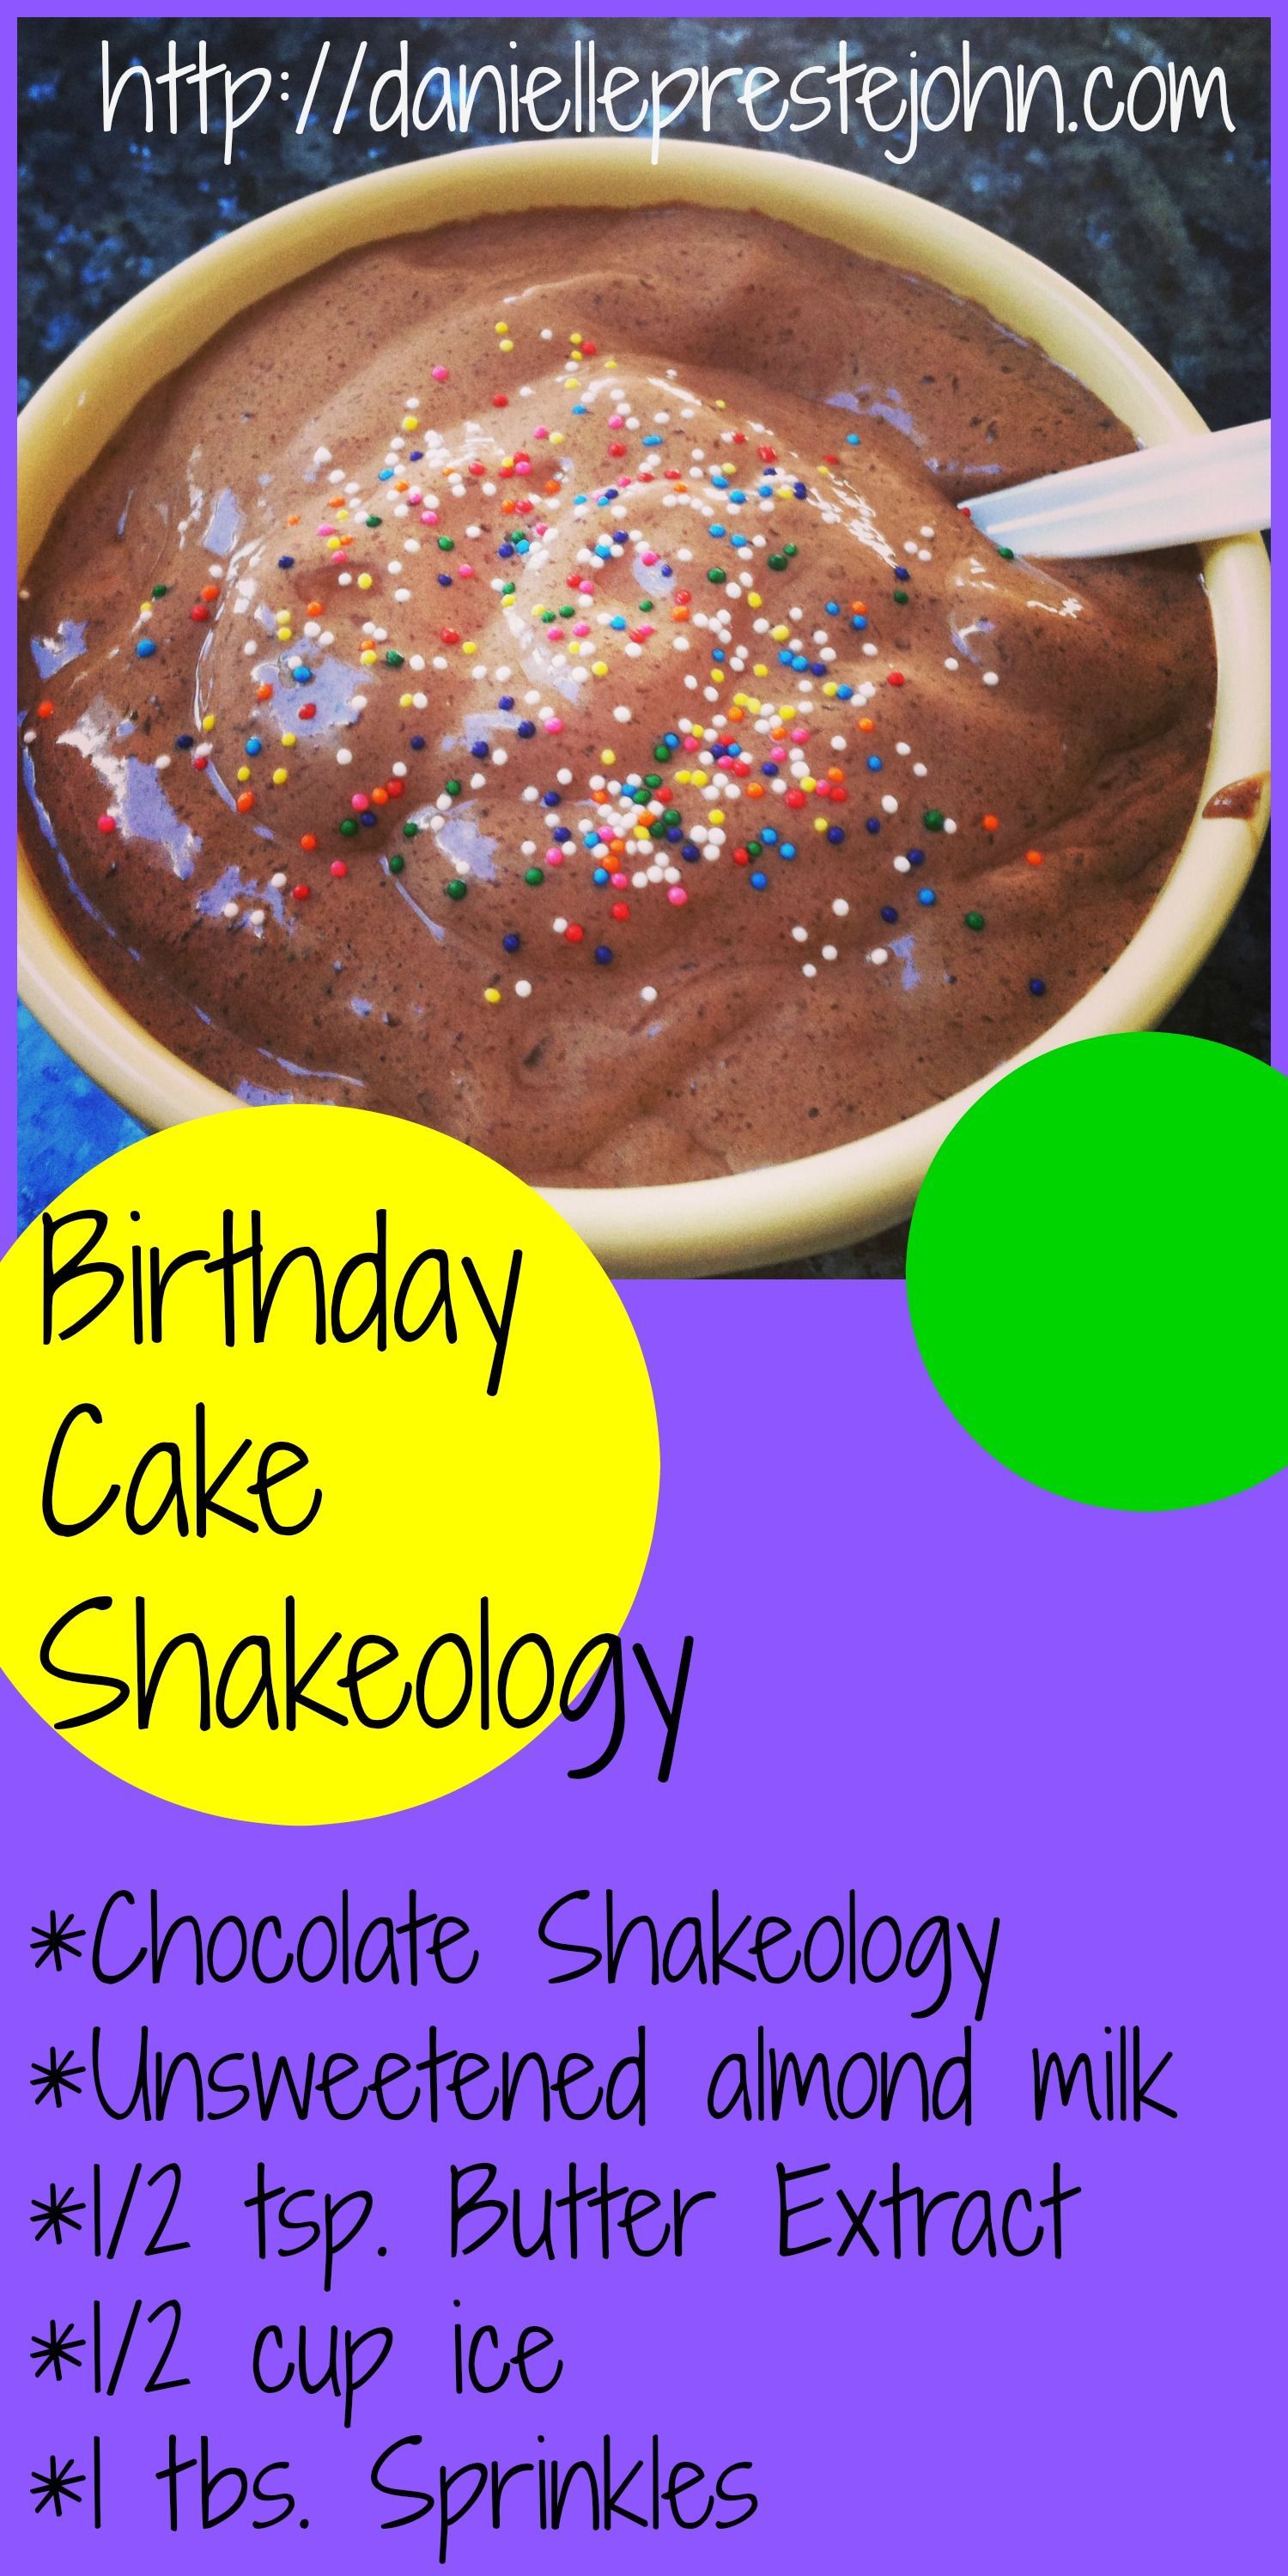 One of my favorite Shakeology Recipes! Birthday cake complete with